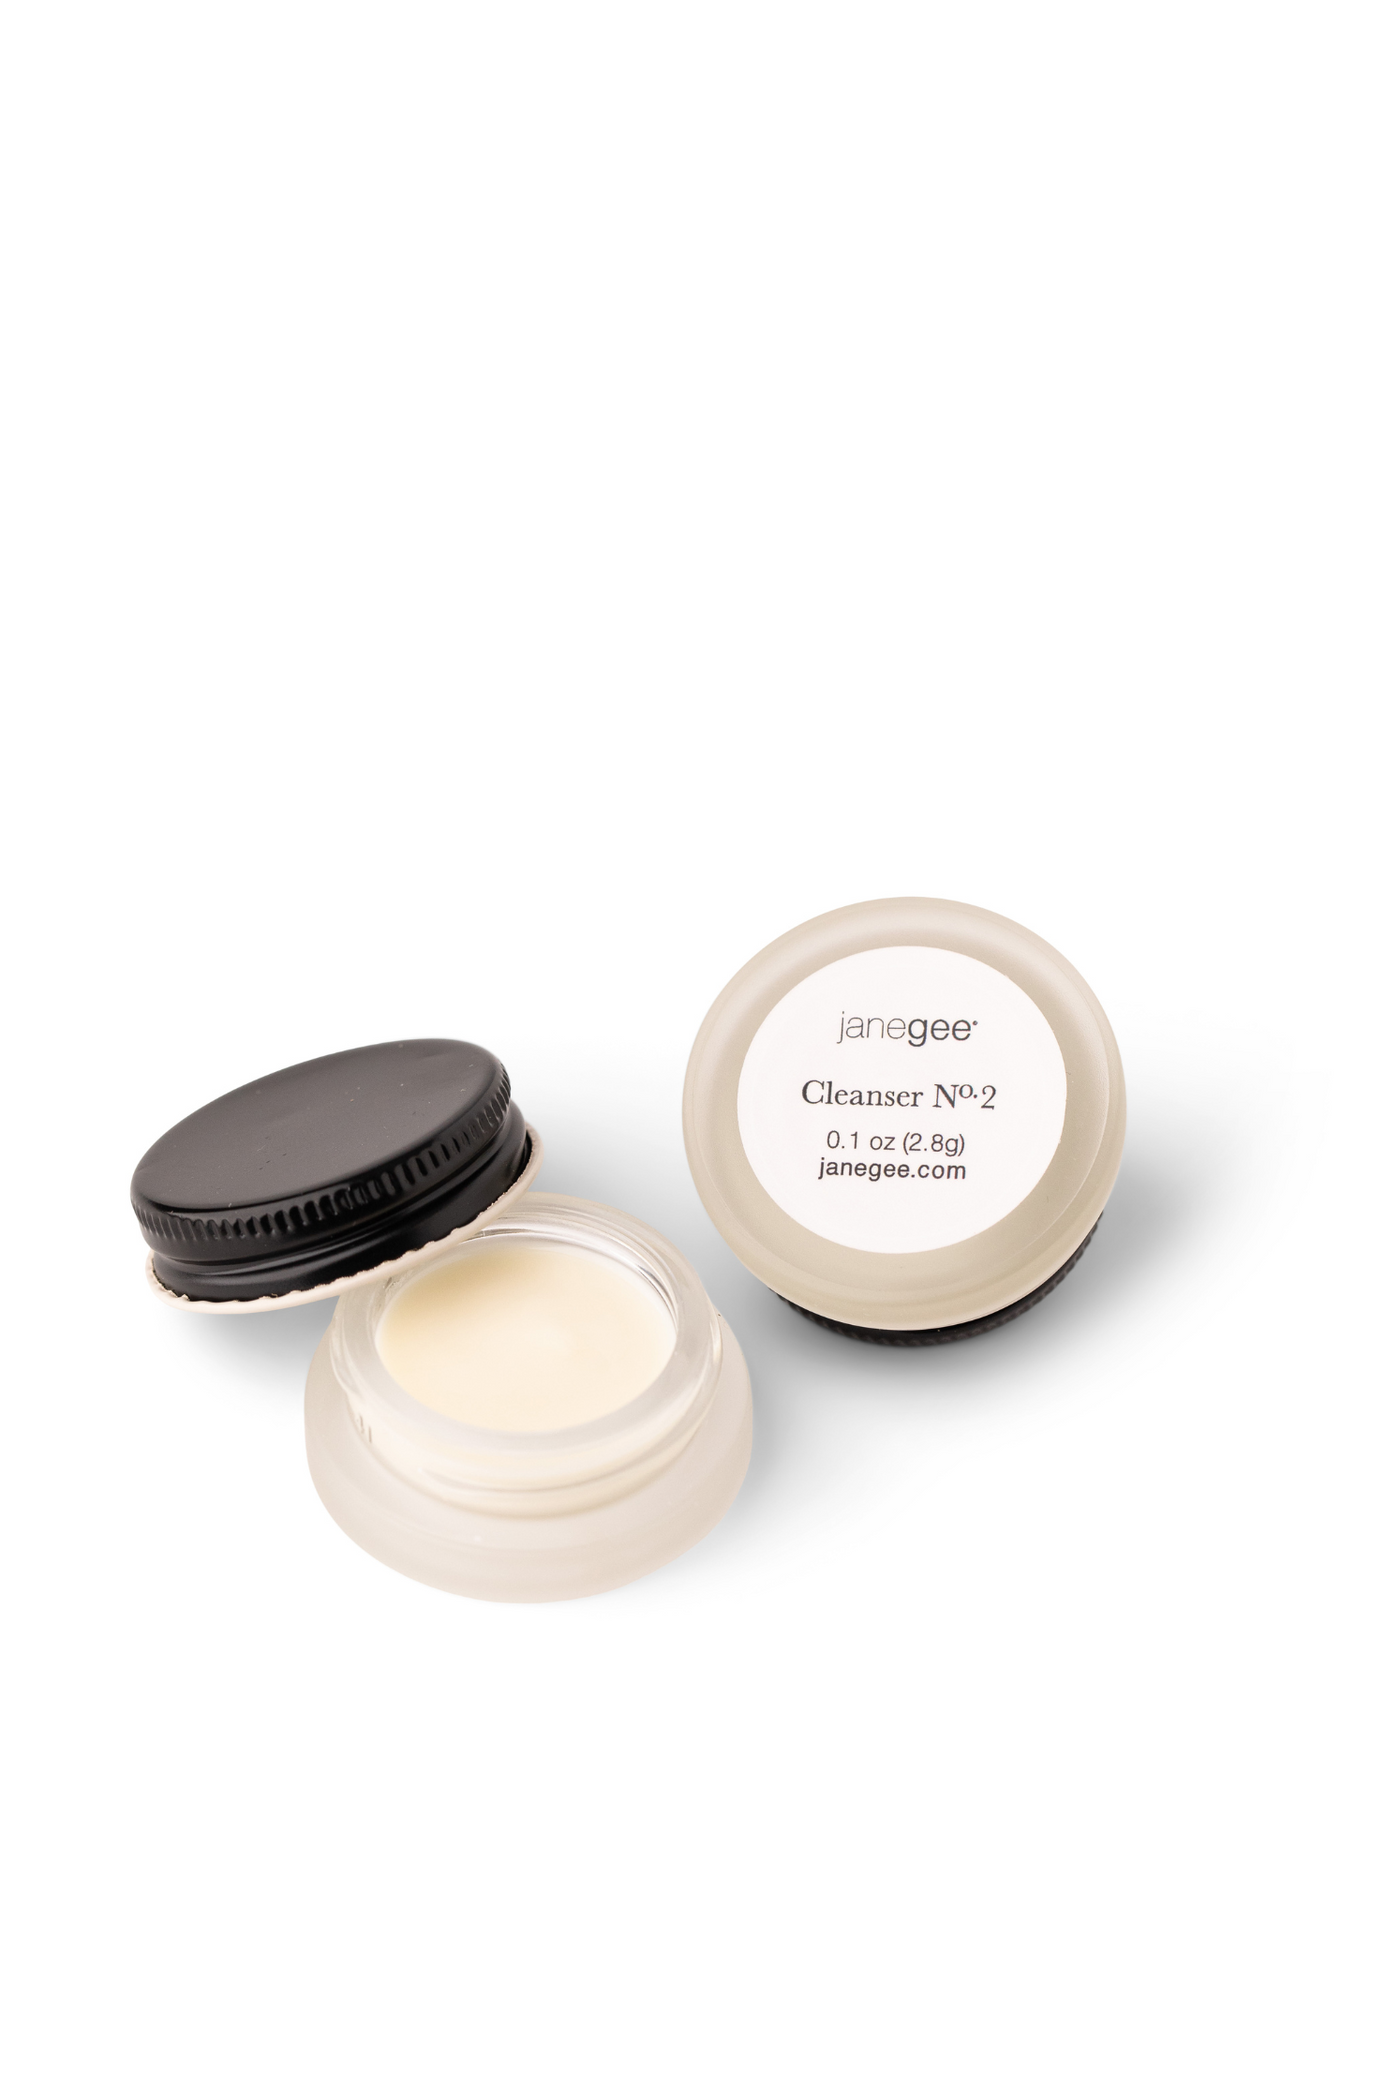 janegee Cleanser No.2 Sample